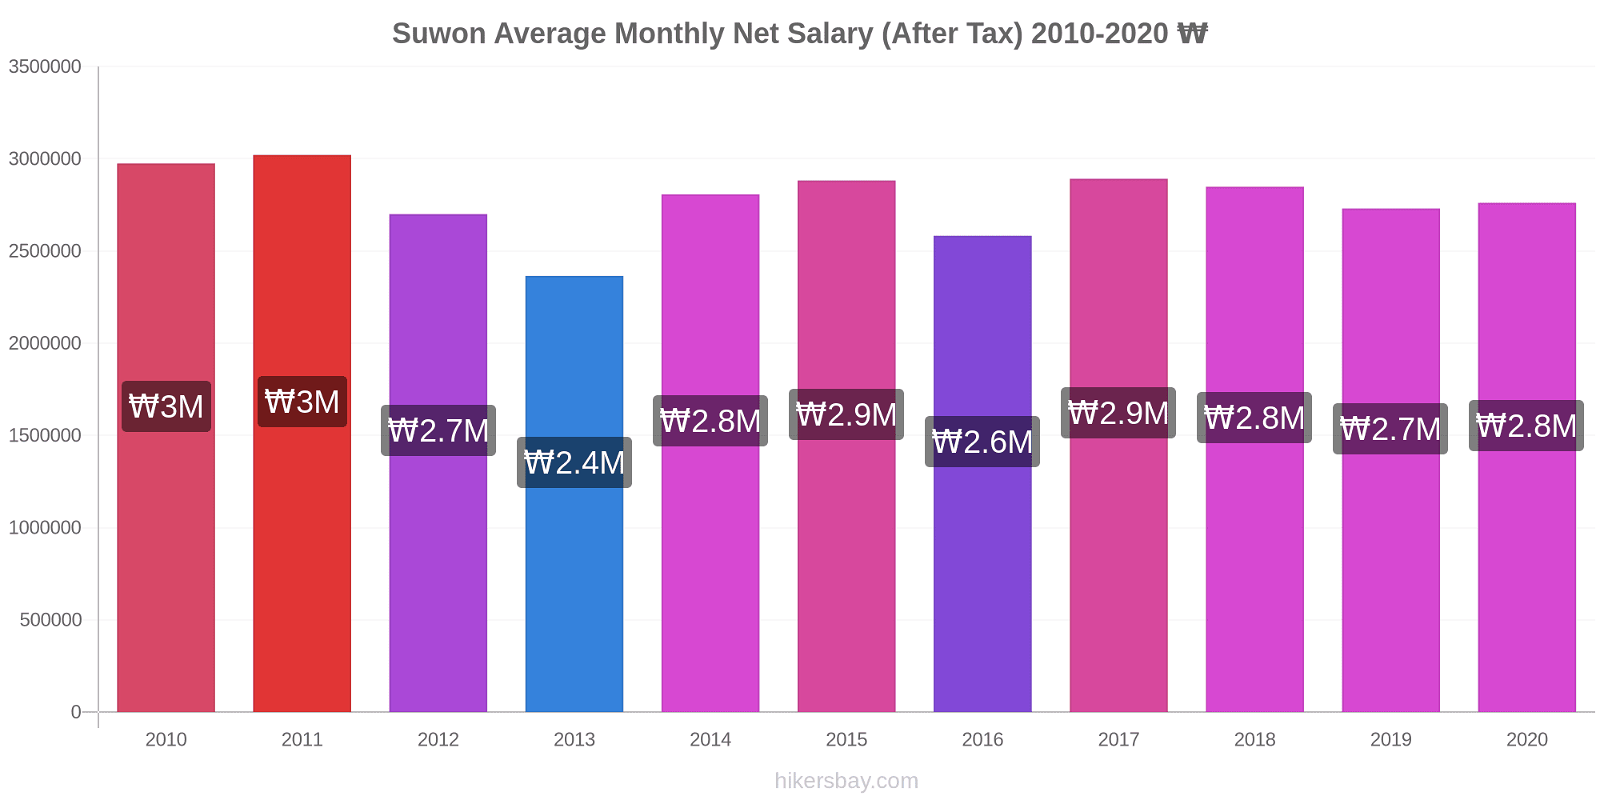 Suwon price changes Average Monthly Net Salary (After Tax) hikersbay.com